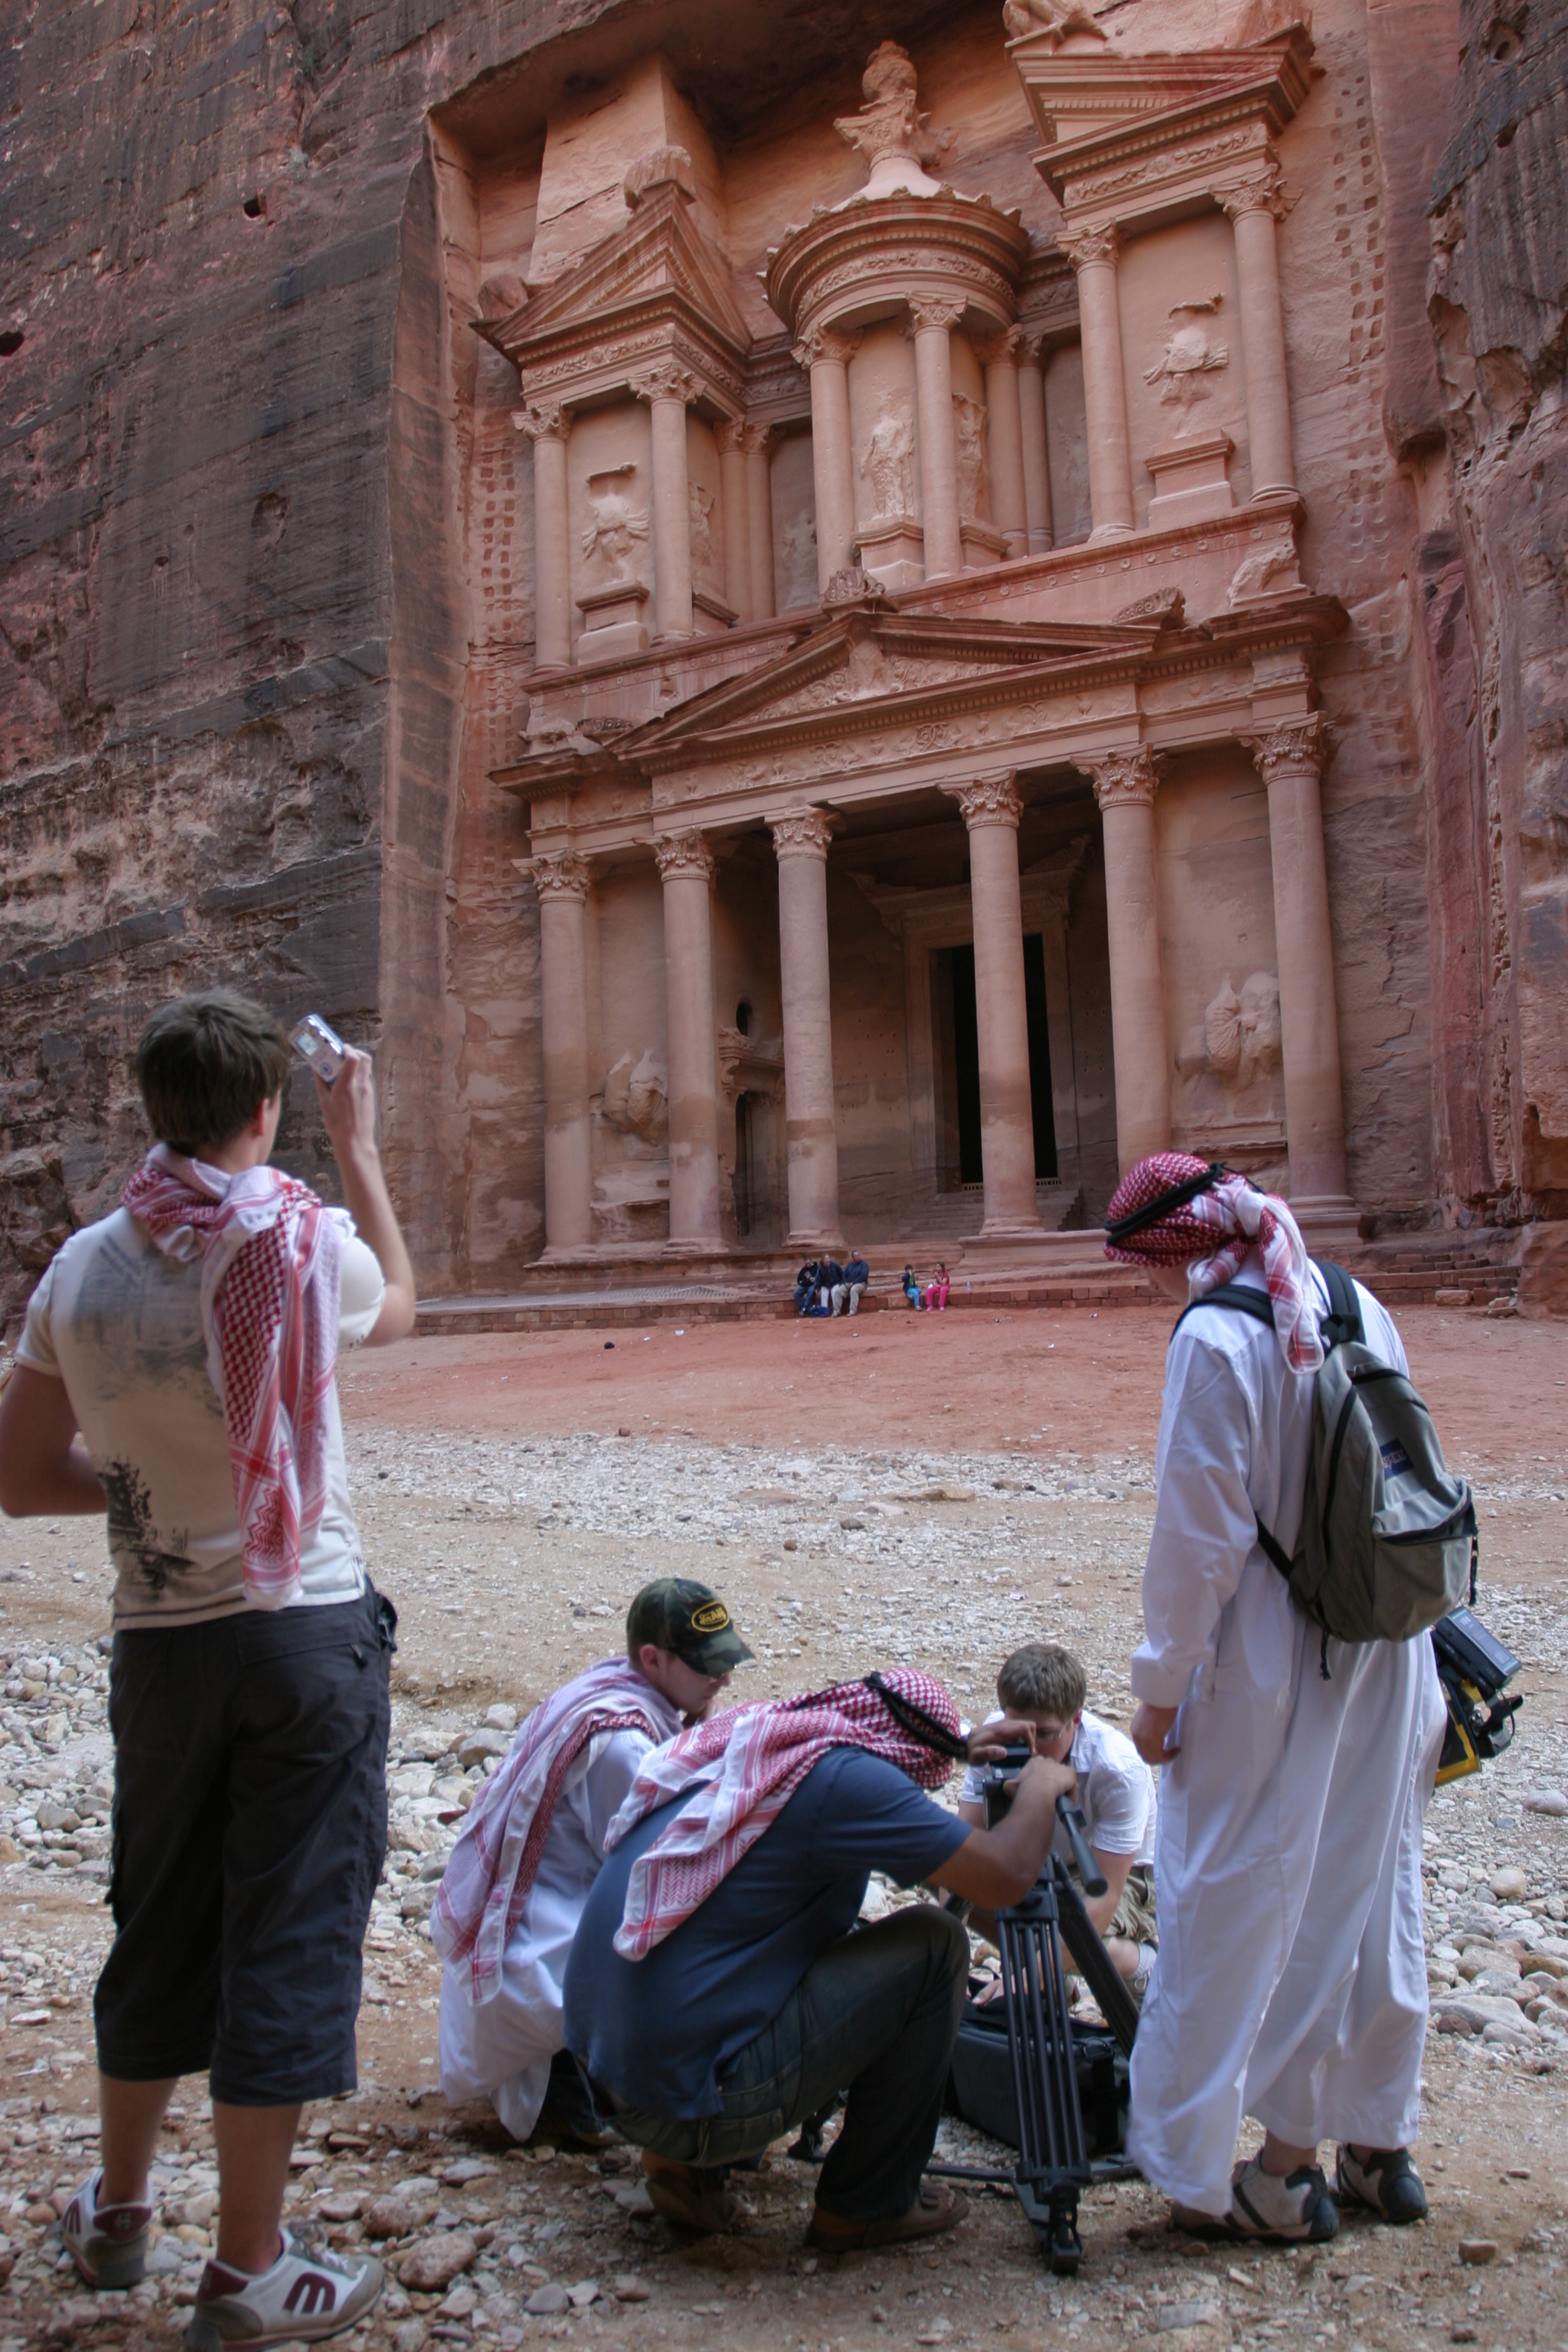 On location for 'Footsteps in Arabia' at Petra, Jordan.